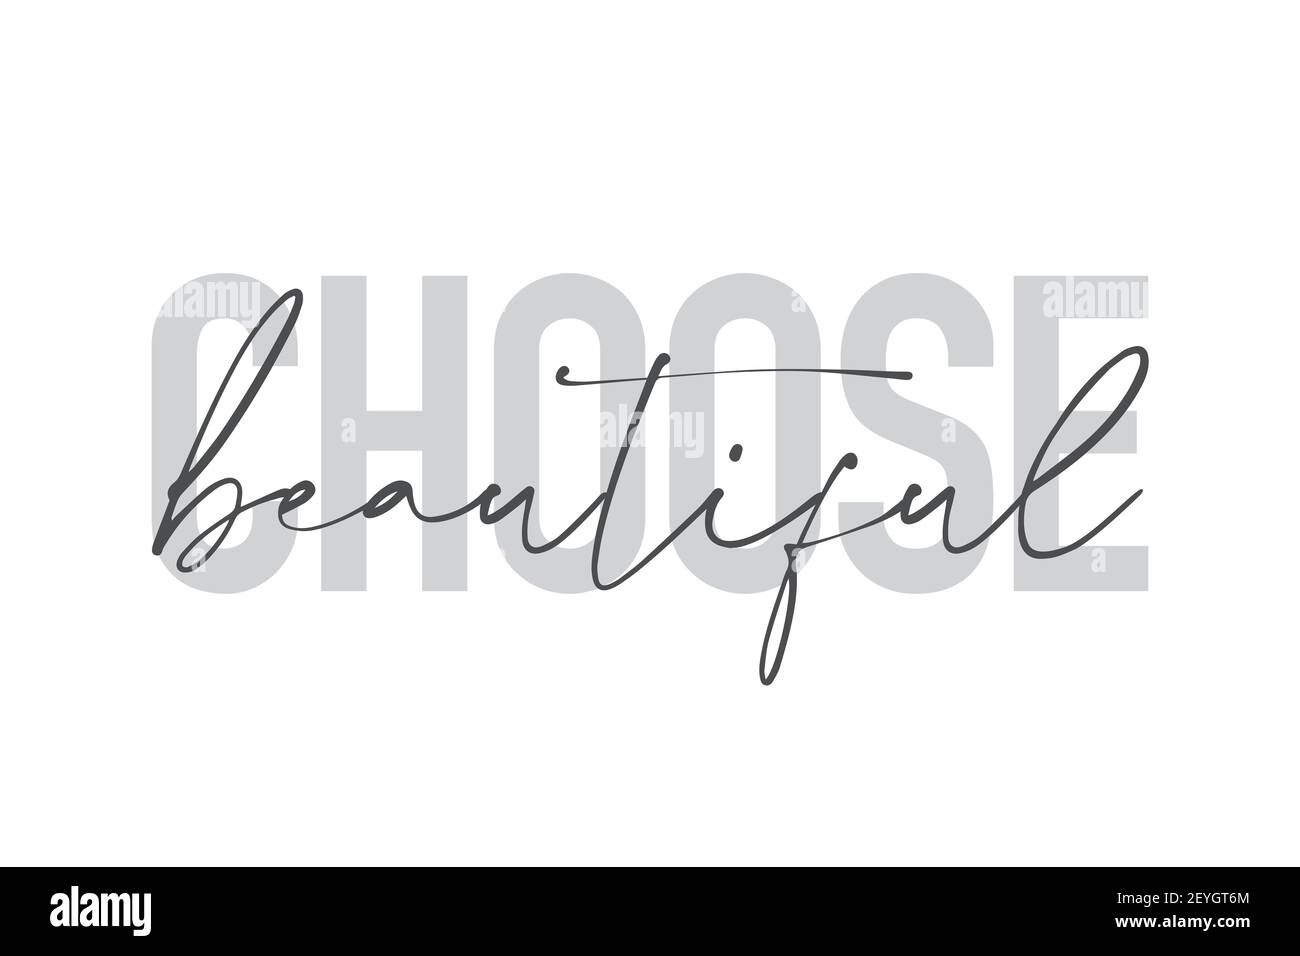 Modern, urban, simple graphic design of a saying 'Choose Beautiful' in grey colors. Trendy, cool, handwritten typography Stock Photo